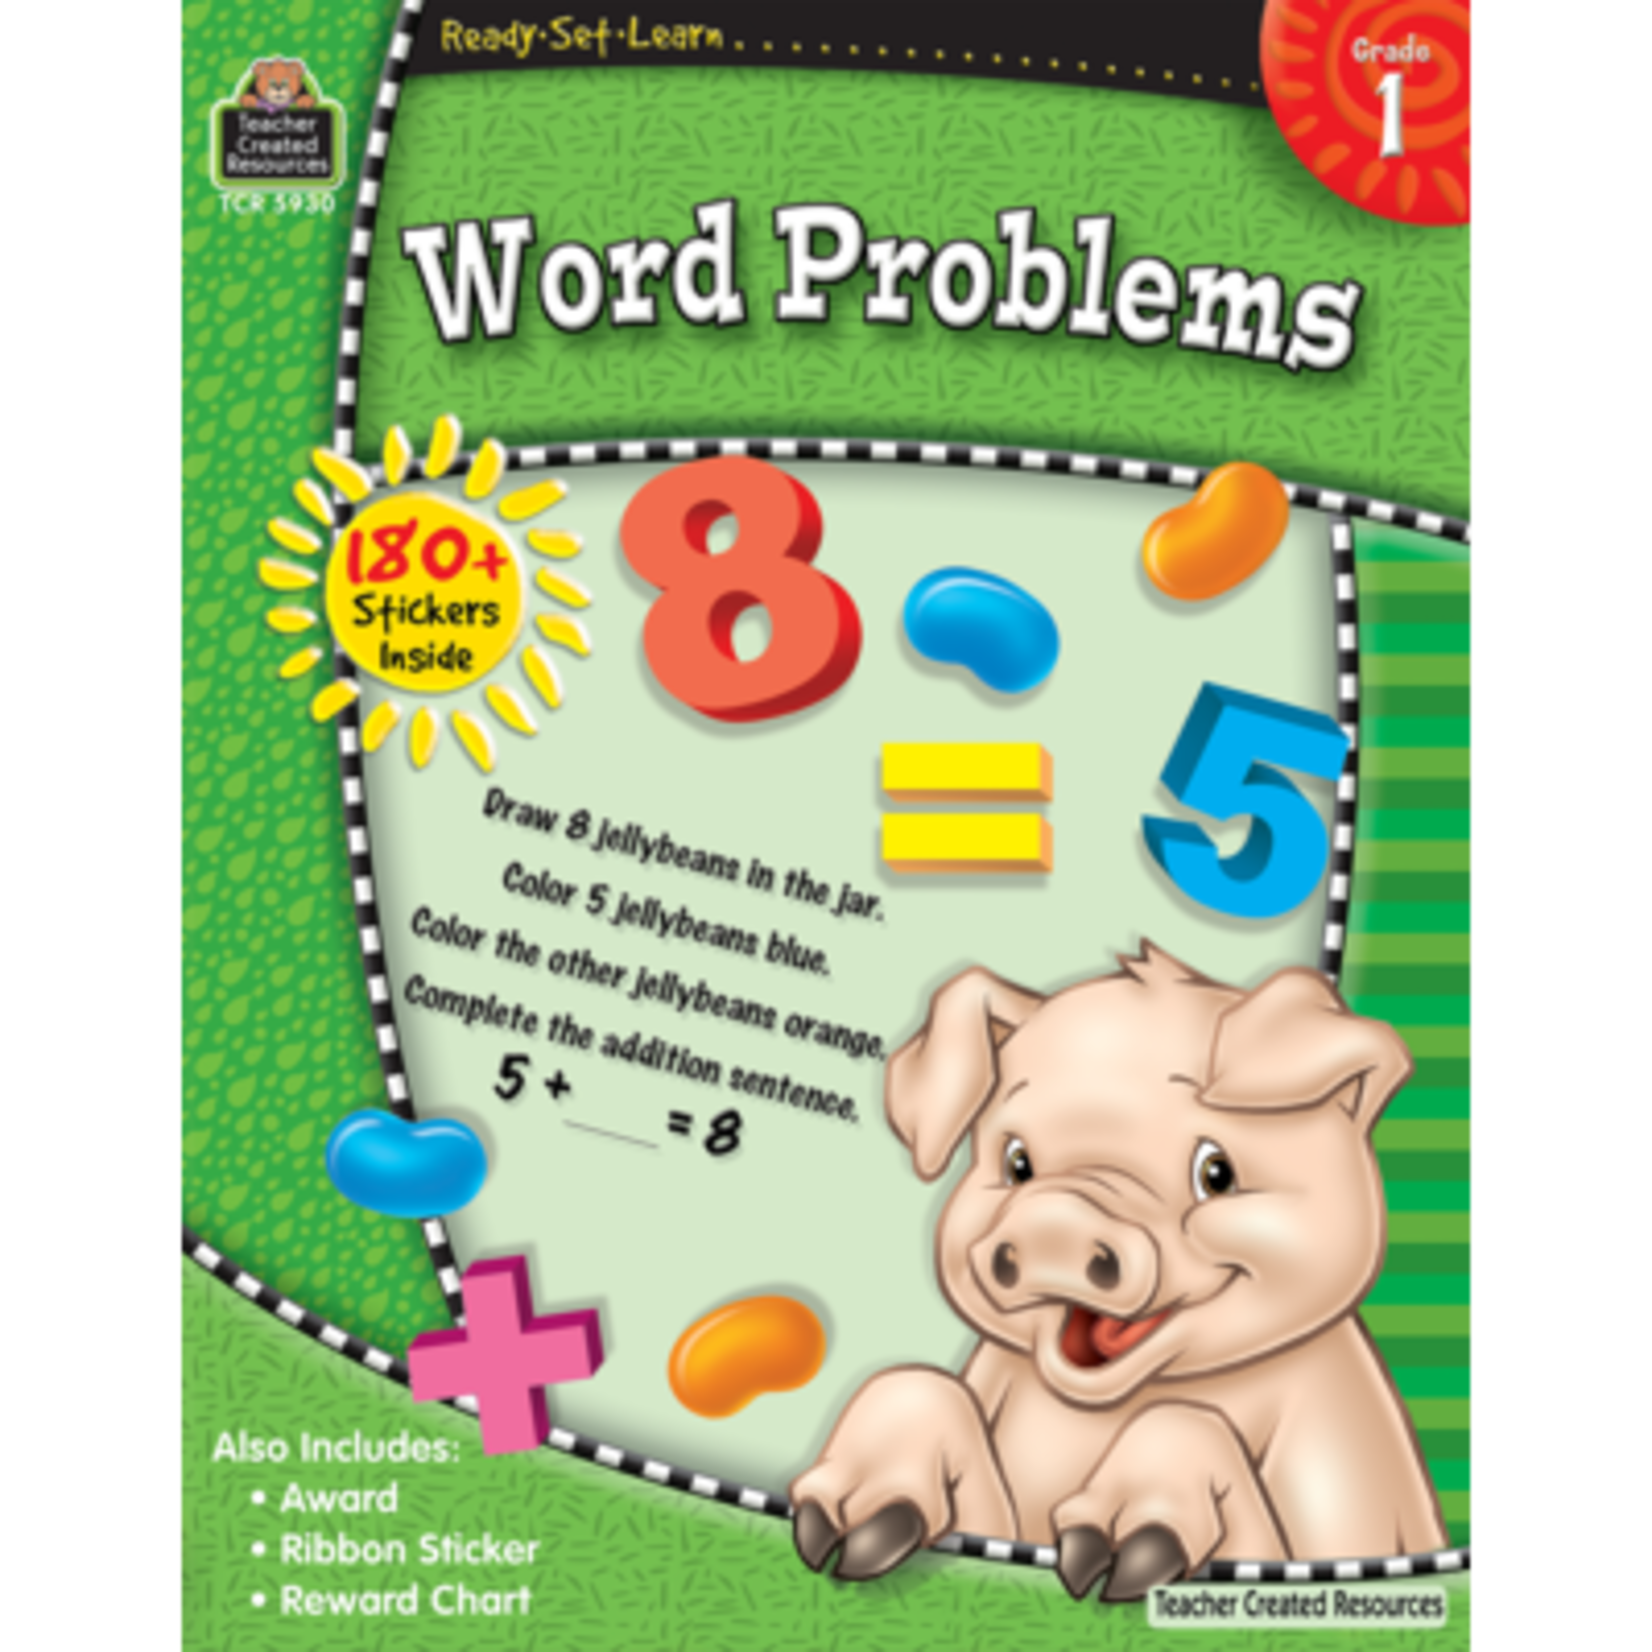 TEACHER CREATED RESOURCES Ready-Set-Learn: Word Problems Grade 1